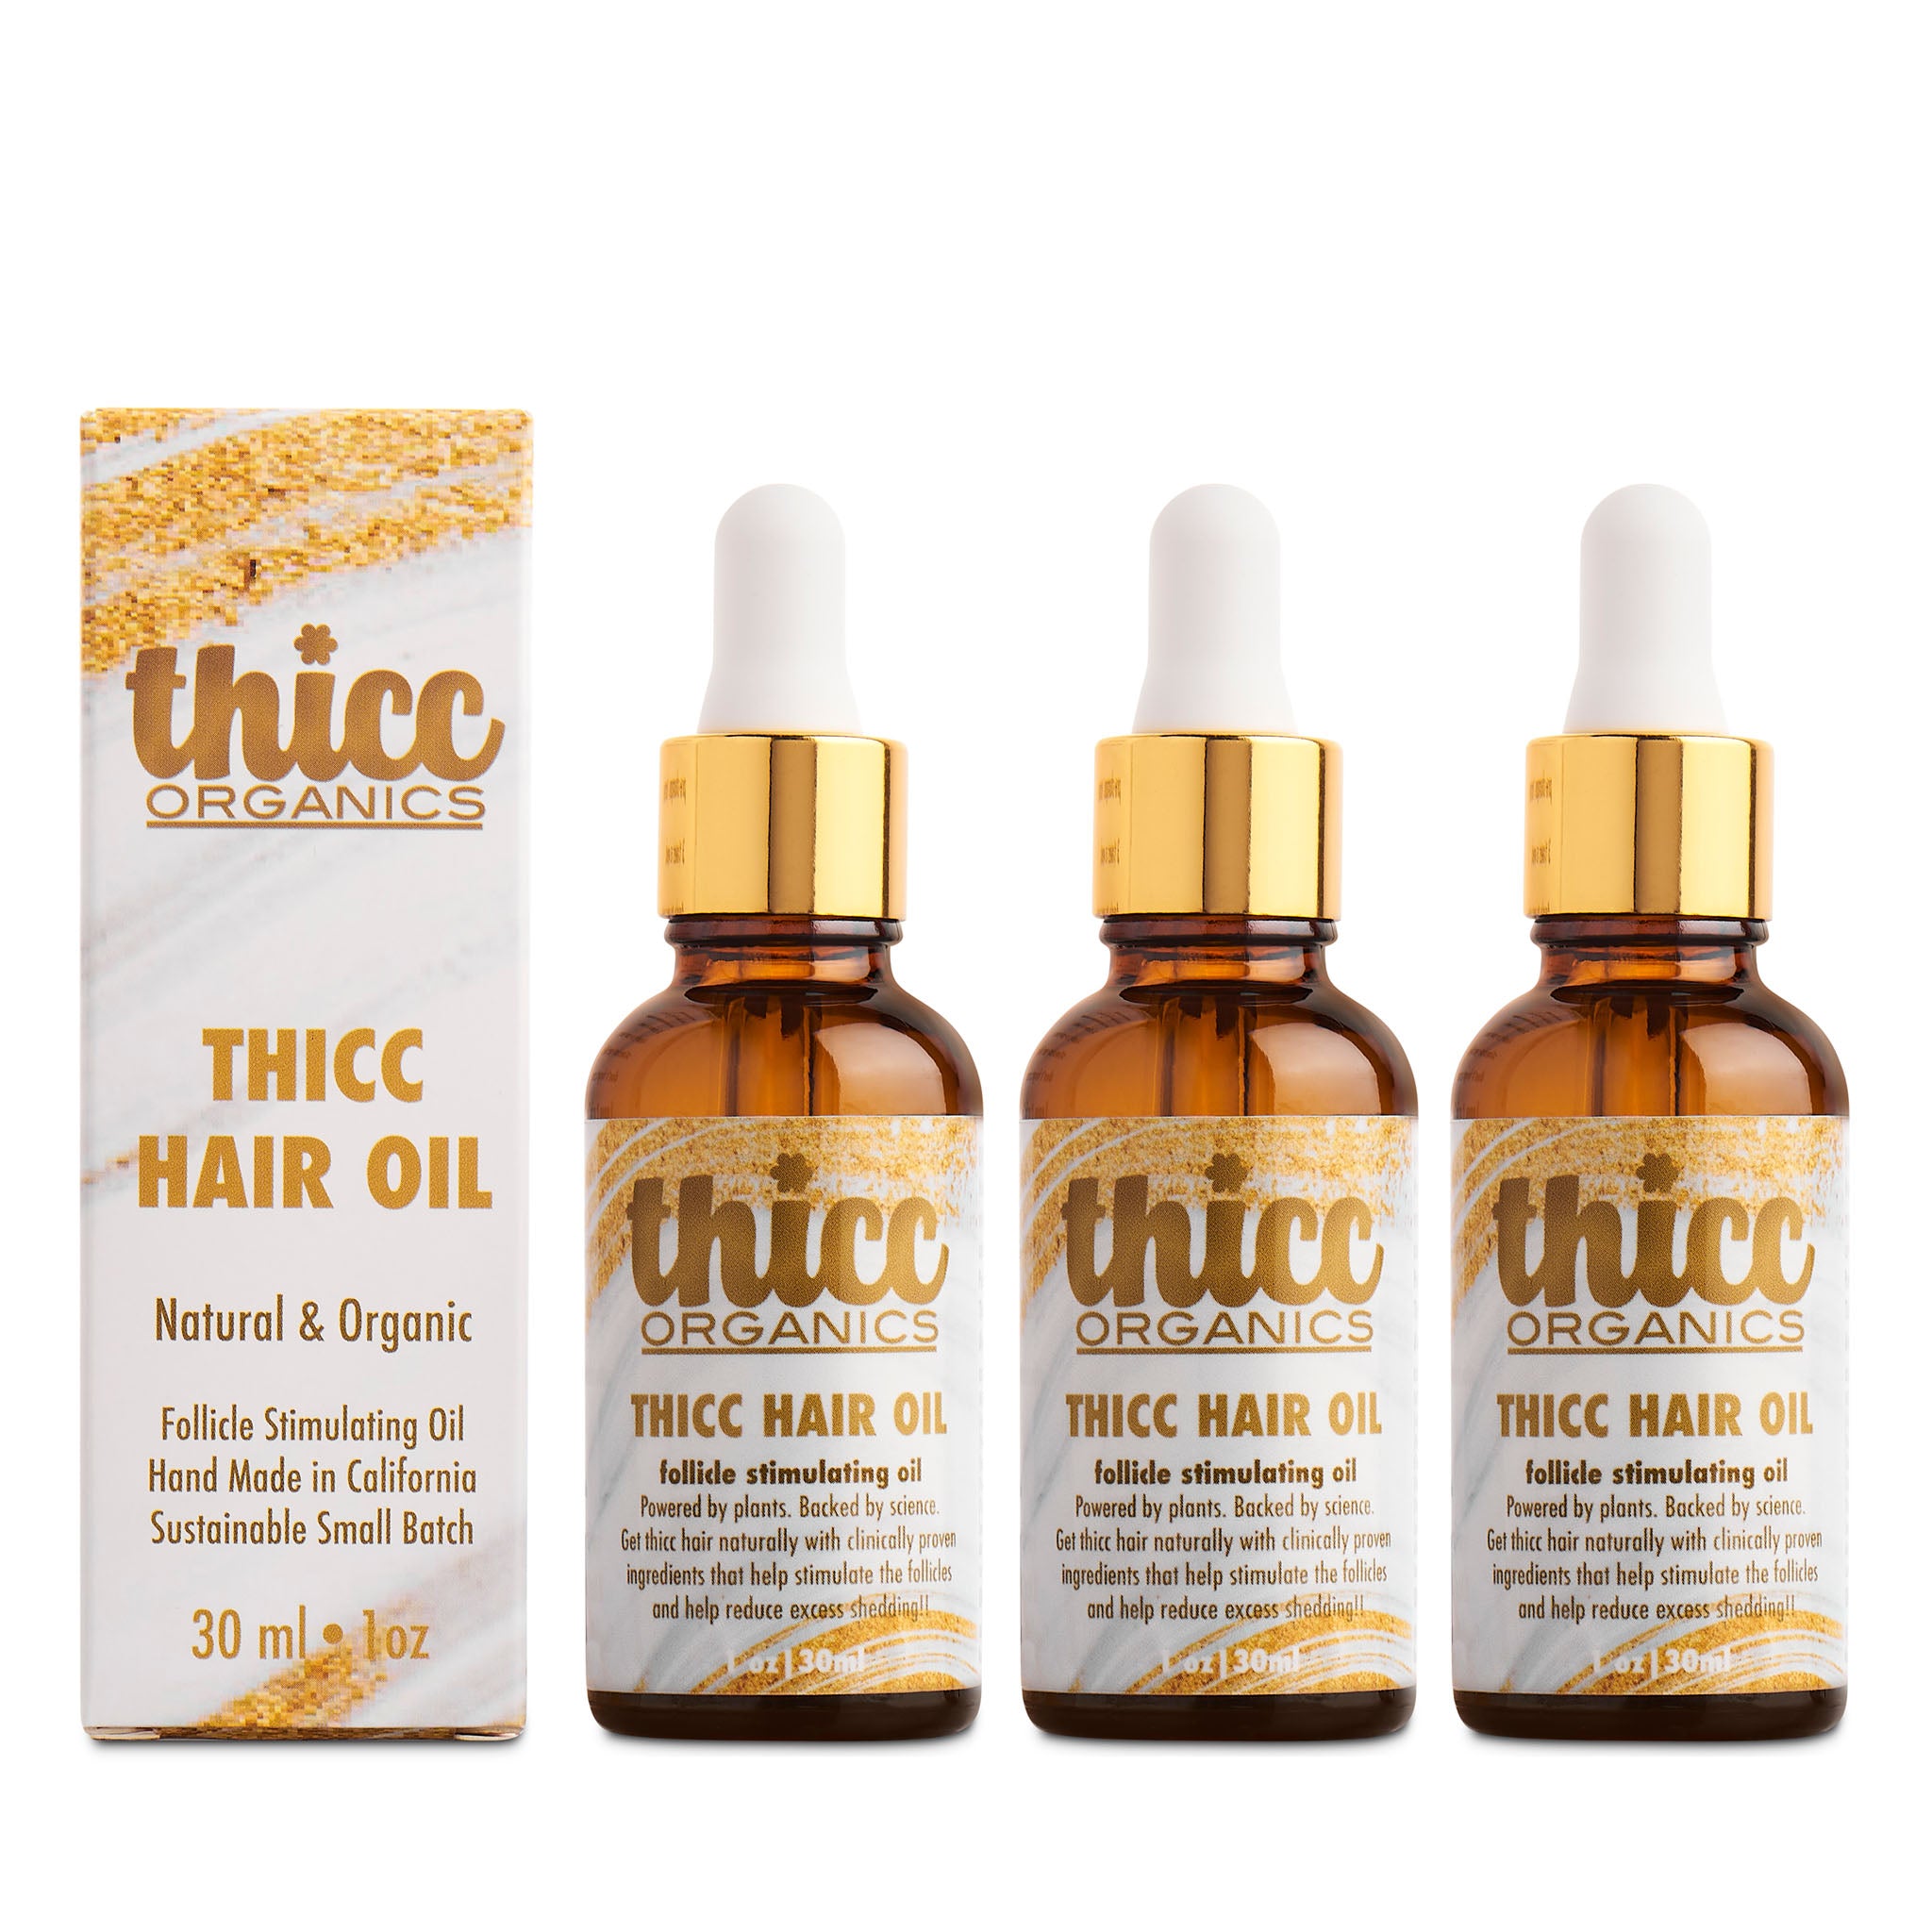 Thicc Hair Oil 3 Pack